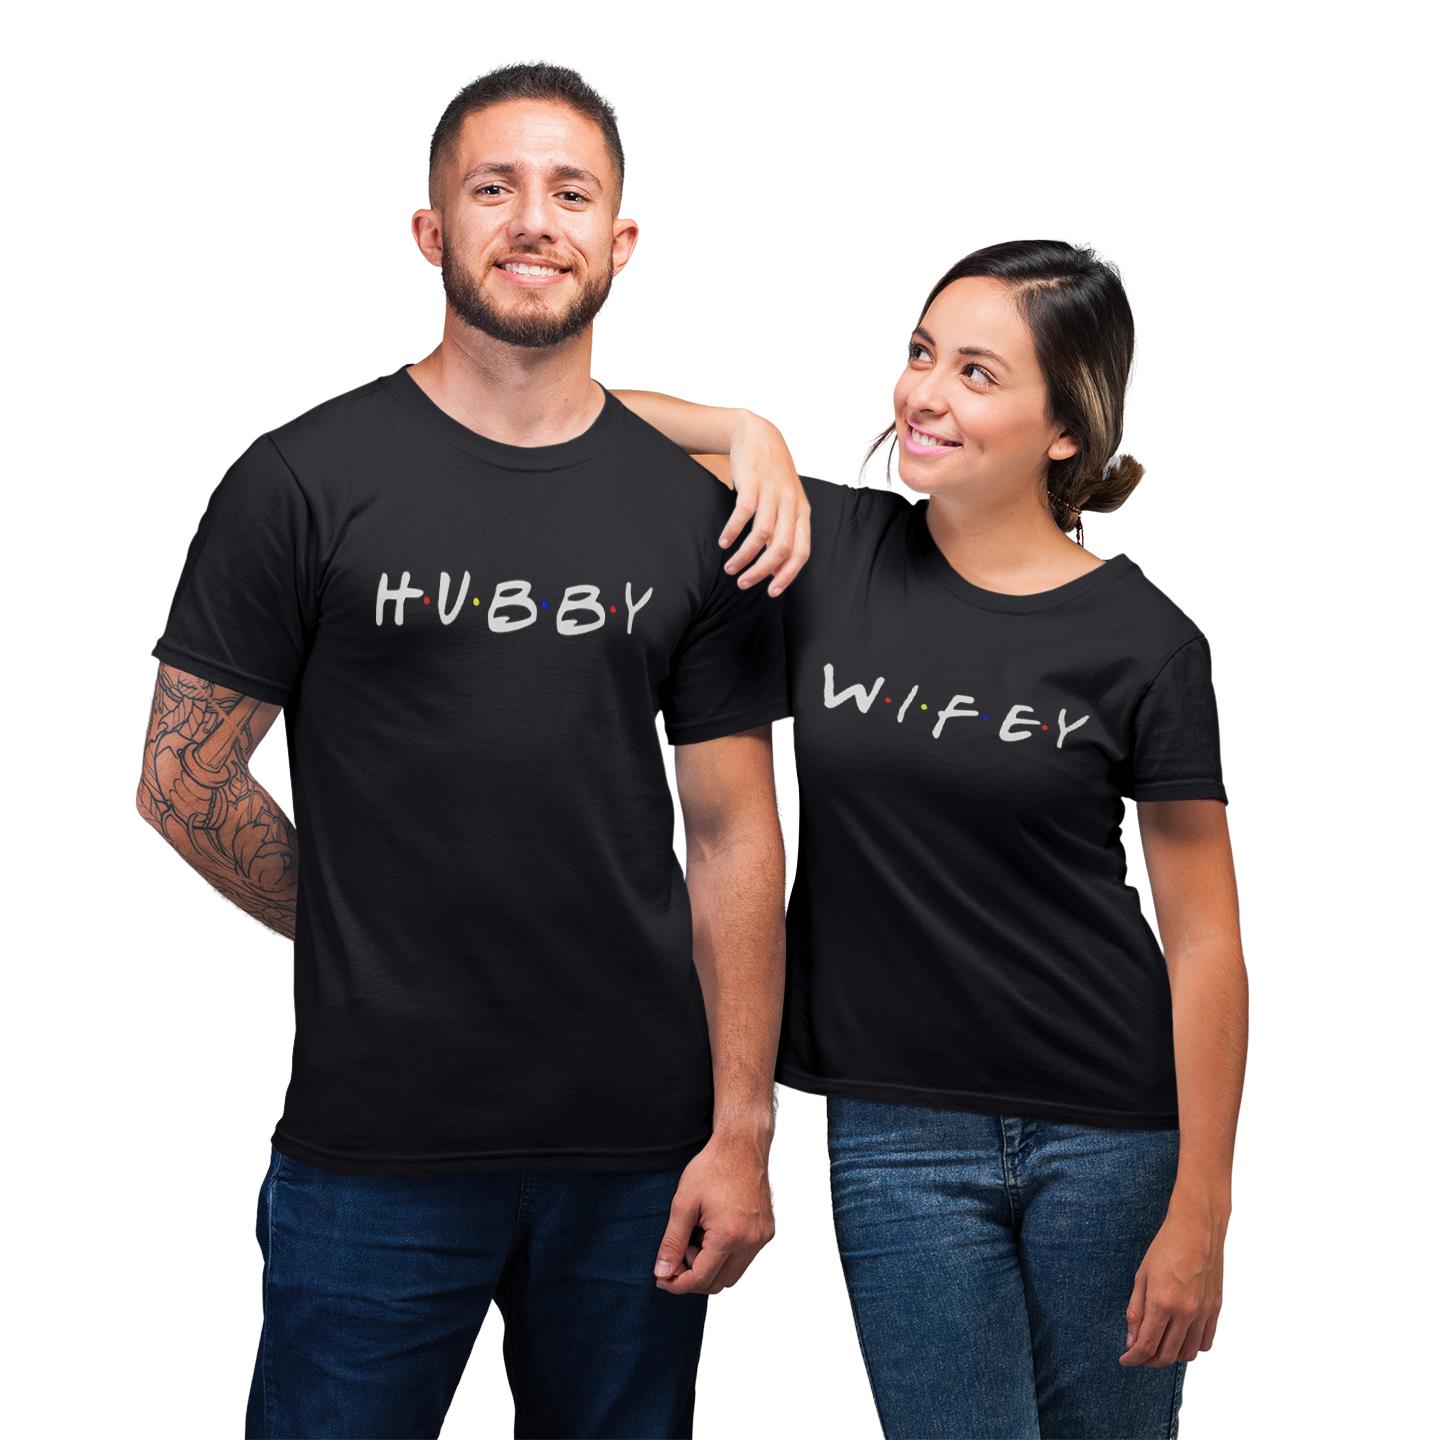 Funny Shirt For Matching Couple Hubby And Wifey Gift For Wedding Couple Husband Wife T-shirt